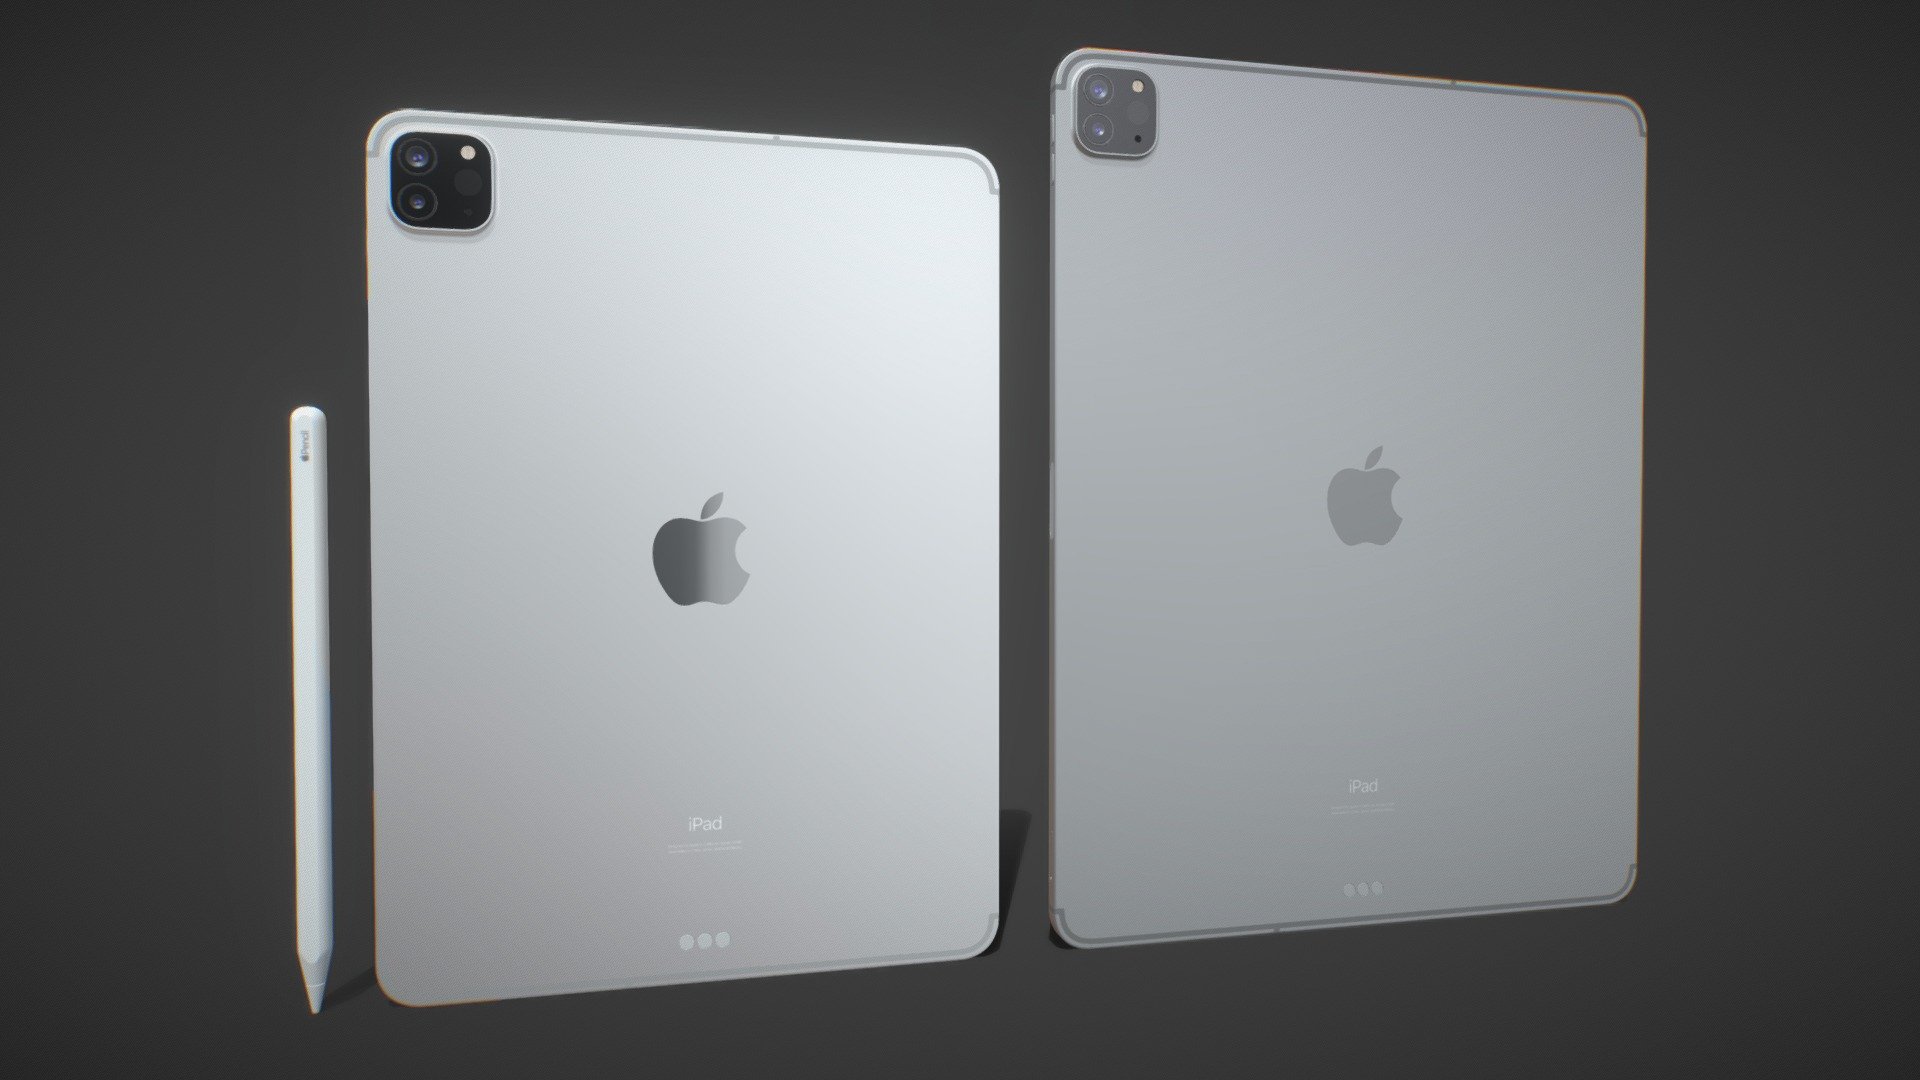 Apple iPad Pro 11 and 12.9 inch 2020.

This set:
- 2 file obj standard
- 2 file 3ds Max 2013 vray material
- 2 file 3ds Max 2013 corona material
- 2 file of 3Ds
- 2 file e3d full set of materials
- 2 file Cinema 4d standard
- 2 file Blender cycles

Topology of geometry:




forms and proportions of The 3D model

the geometry of the model was created very neatly

there are no many-sided polygons

detailed enough for close-up renders

the model optimized for turbosmooth modifier

Not collapsed the turbosmooth modified

apply the Smooth modifier with a parameter to get the desired level of detail

Materials and Textures:




3ds max files included Vray-Shaders

3ds max files included Corona-Shaders

file e3d full set of materials

all texture paths are cleared

Organization of scene:




to all objects and materials

real world size (system units - mm)

coordinates of location of the model in space (x0, y0, z0)

does not contain extraneous or hidden objects (lights, cameras, shapes etc.)
 - Apple iPad Pro 11 and 12.9 inch 2020 - Buy Royalty Free 3D model by madMIX 3d model